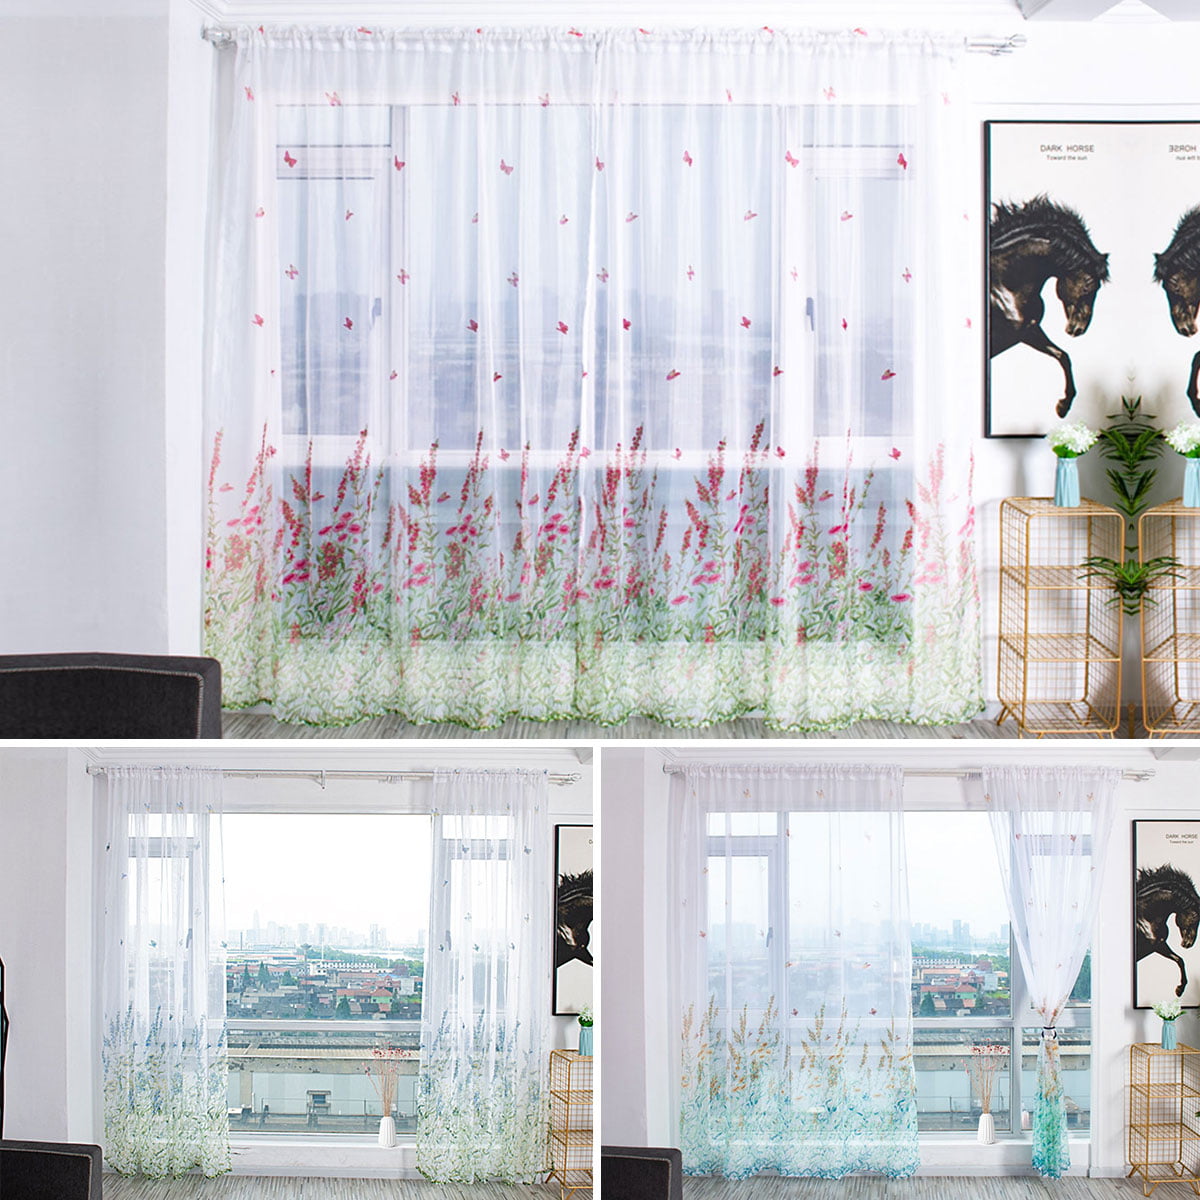 Details about   Bedroom Tulle Curtains Sheer Voile Curtain Wedding Window Drapes Home Decor LI 